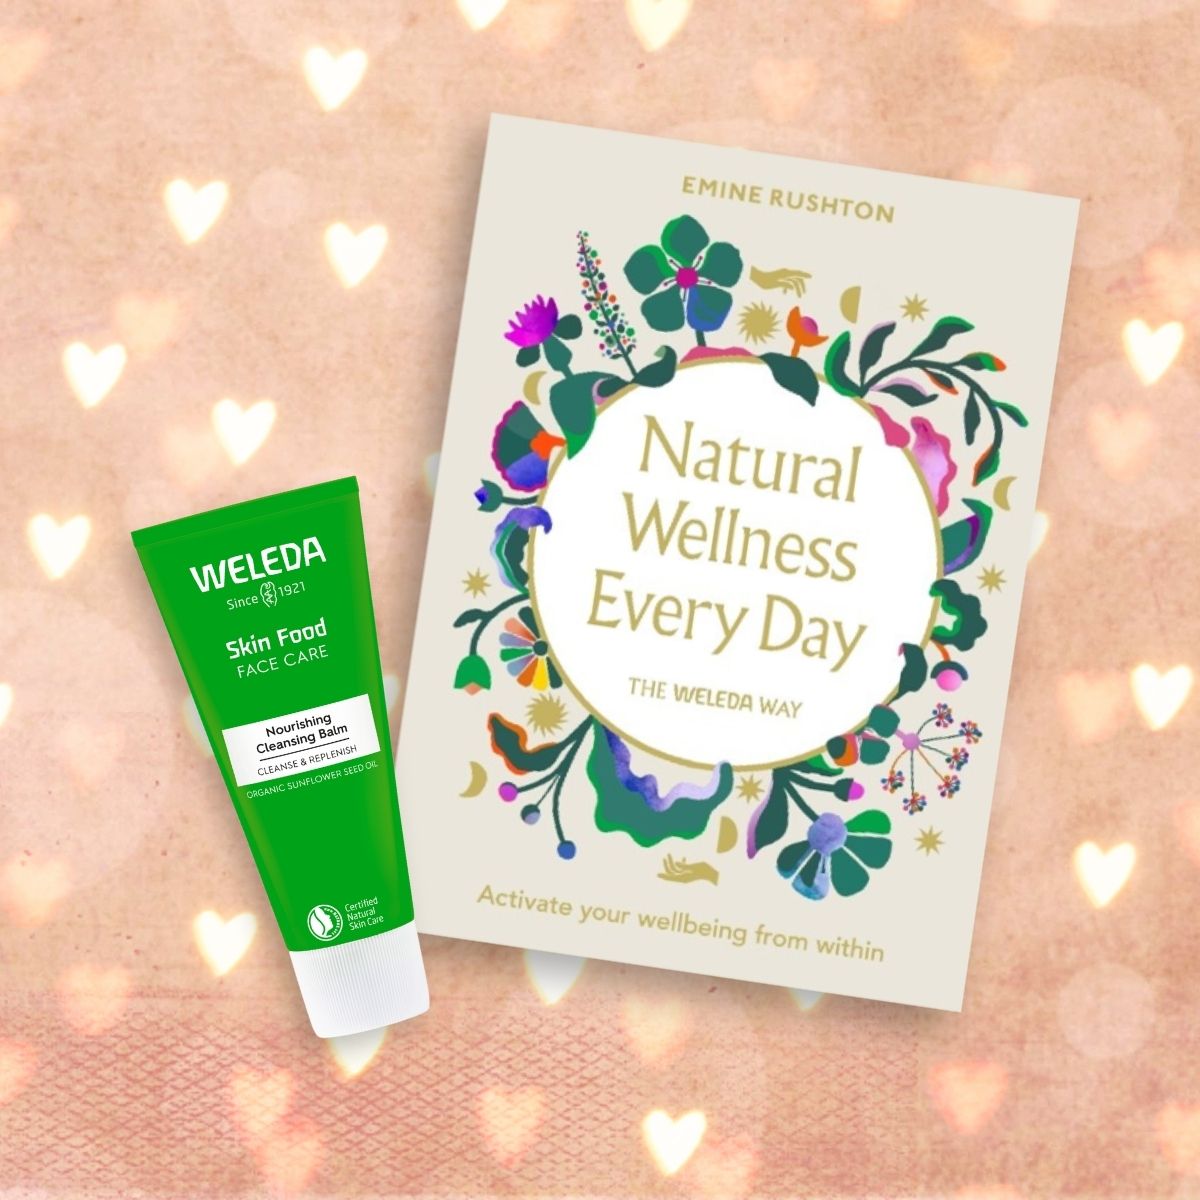 Weleda Bundle (RRP £32.95): 'Natural Wellness Every Day' book and Skin Food Nourishing Cleansing Balm